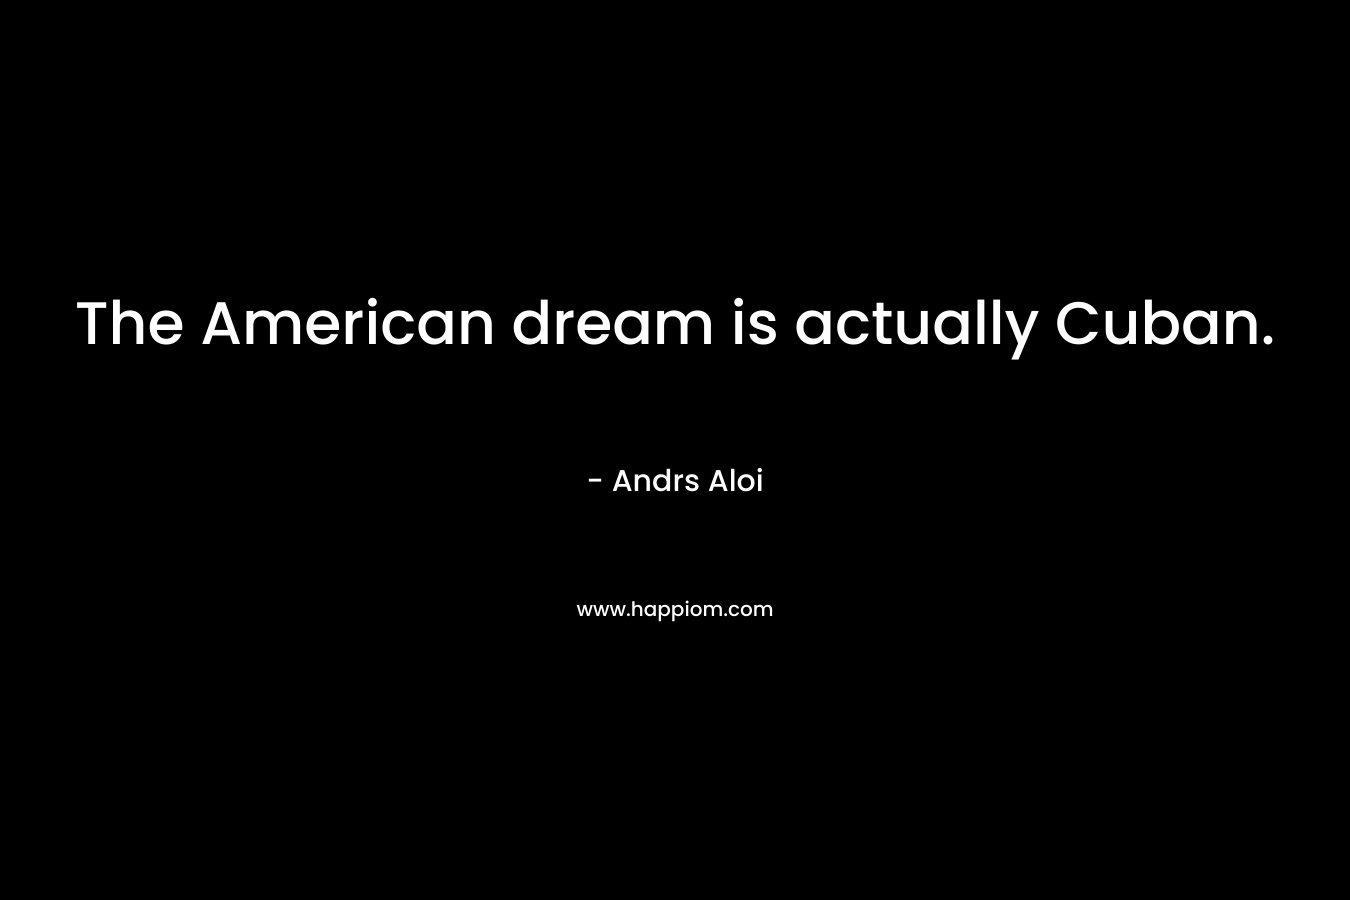 The American dream is actually Cuban. – Andrs Aloi